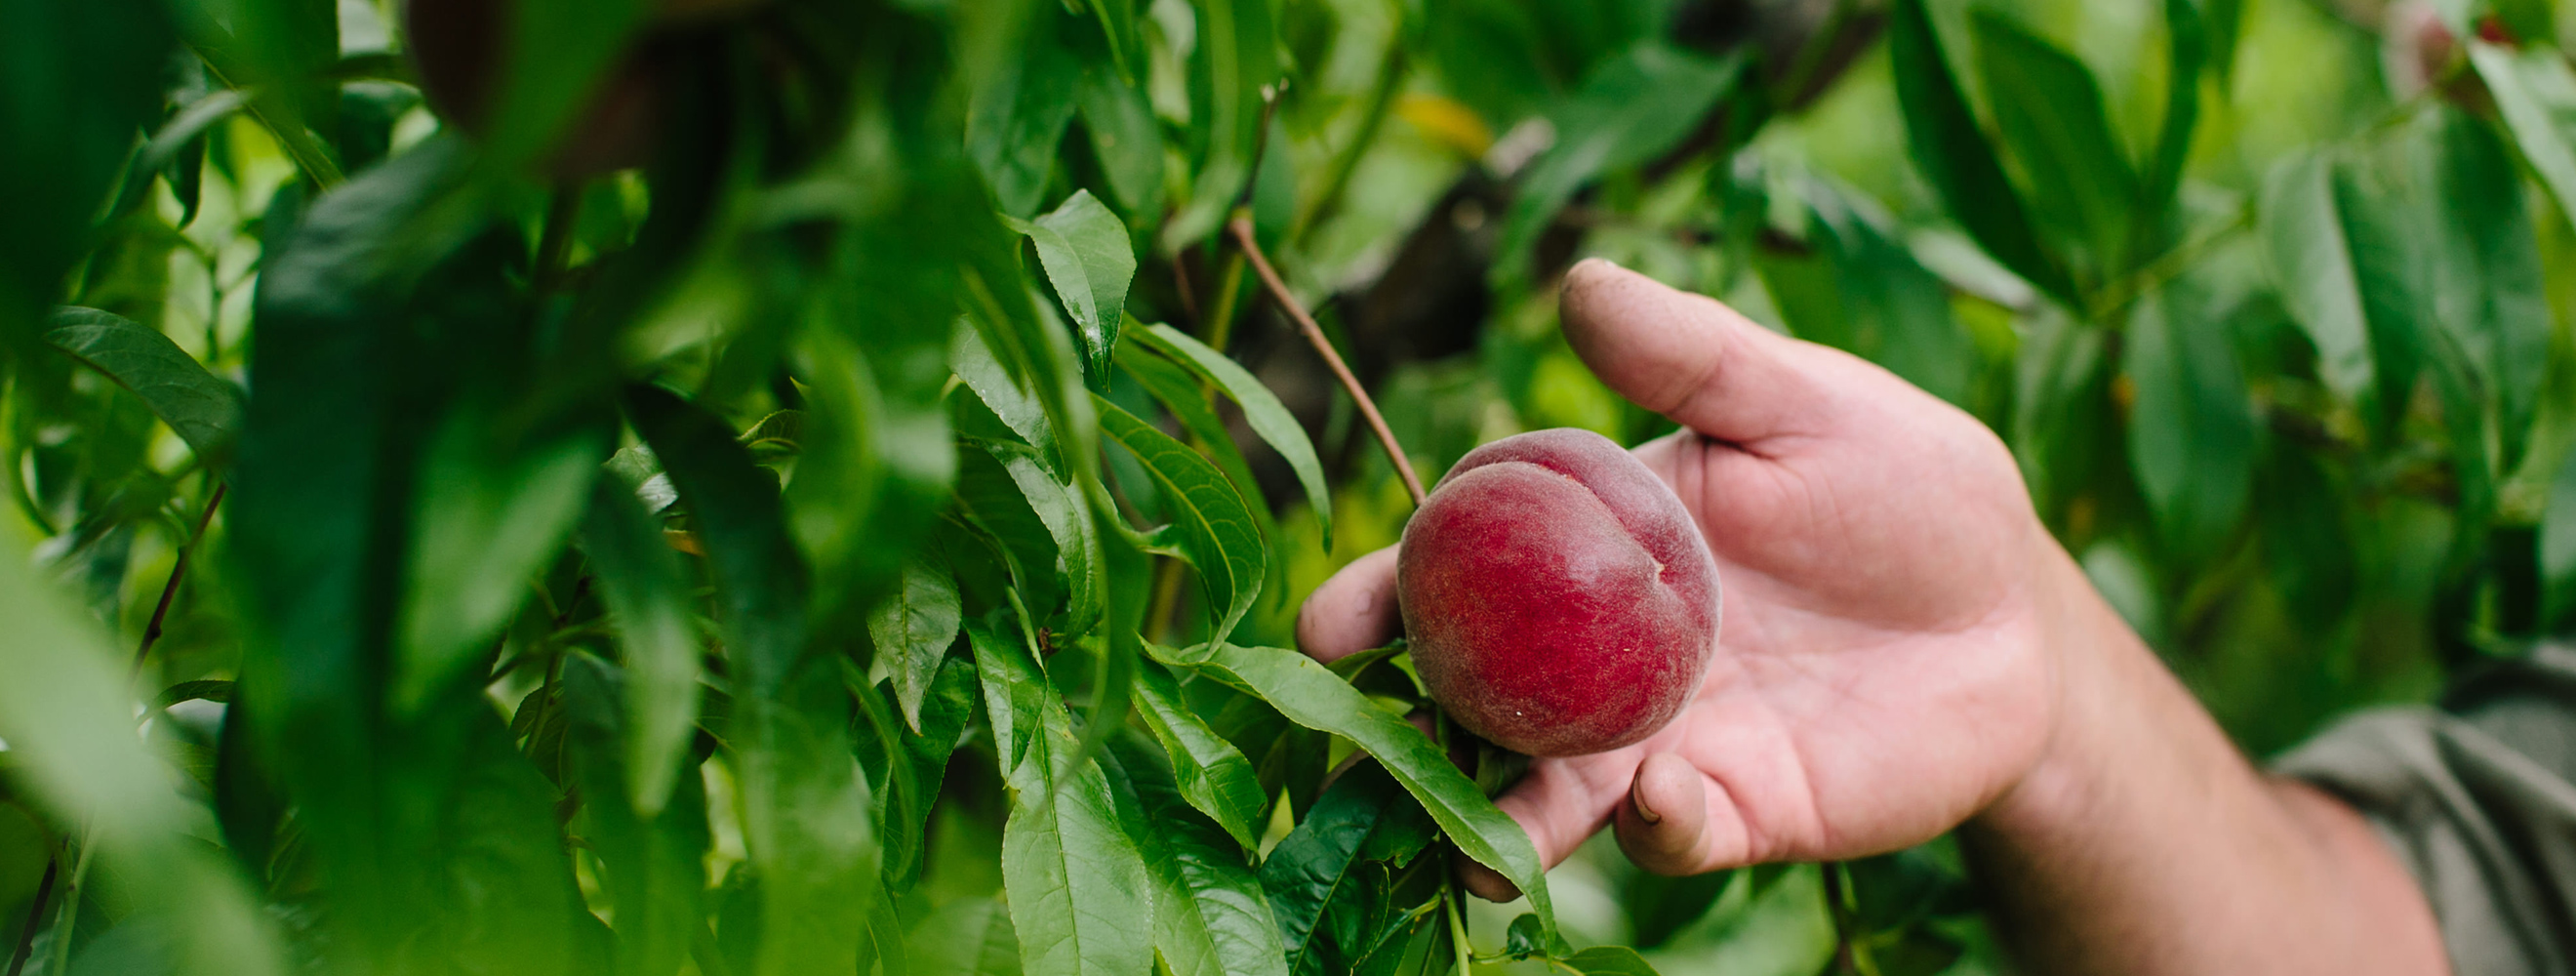 Close up shot of a farmer's hand holding a fresh peach on a tree in an orchard.